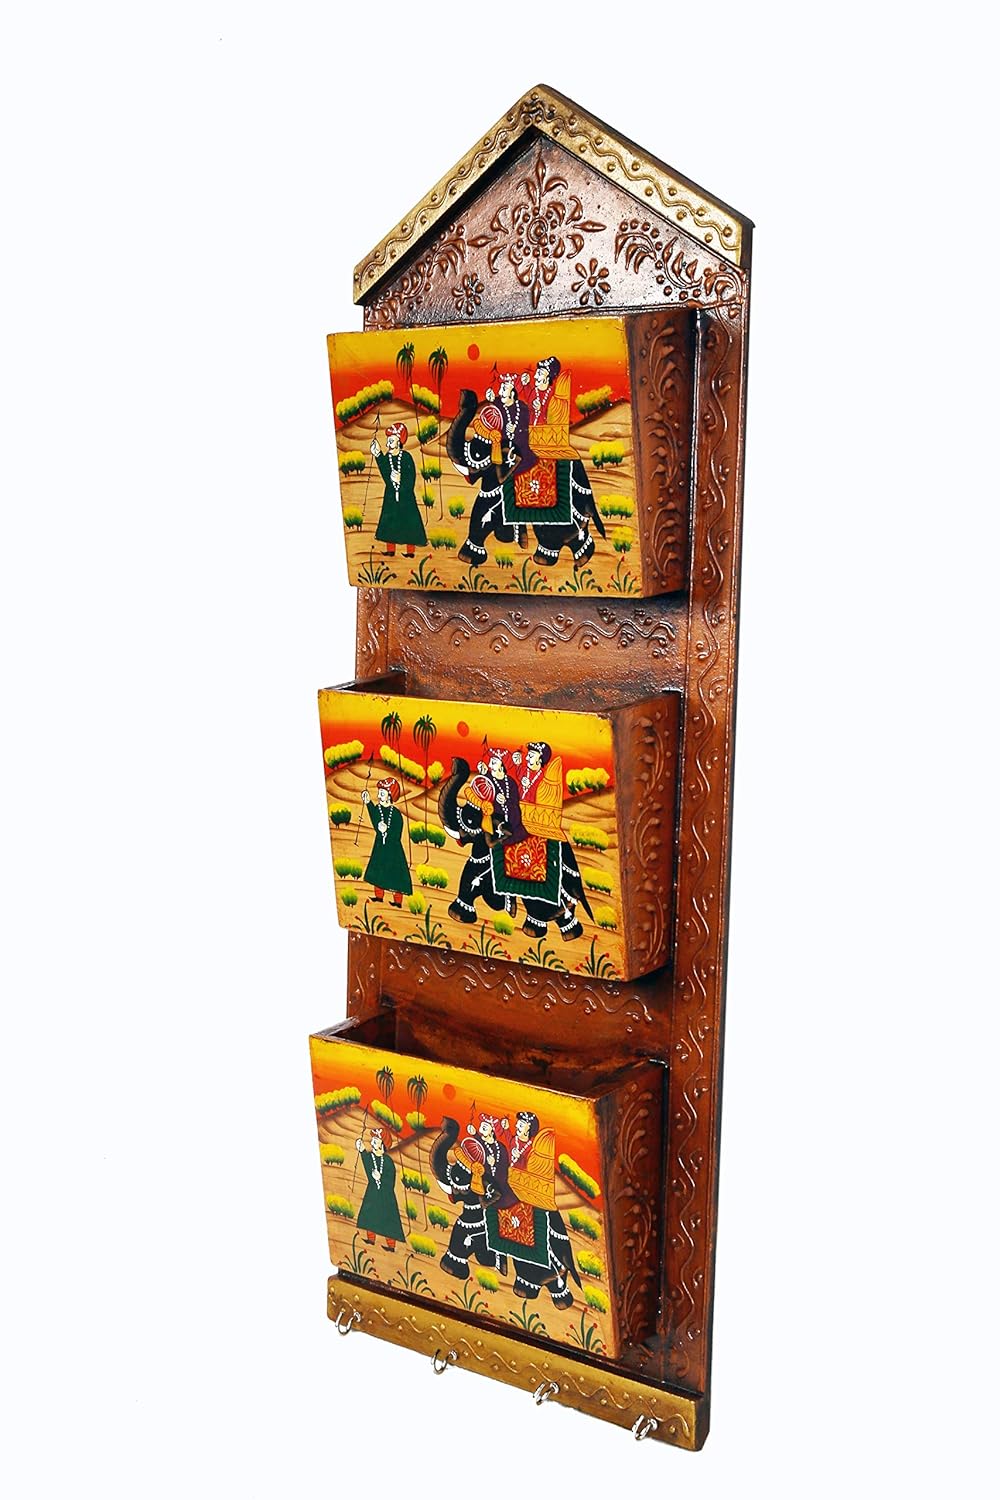 Wooden Hand Painted Letter /Magazine /Newspaper Holder and 4 Key Holder for Wall Home Decor & Gift (21X9 inches, Brown)